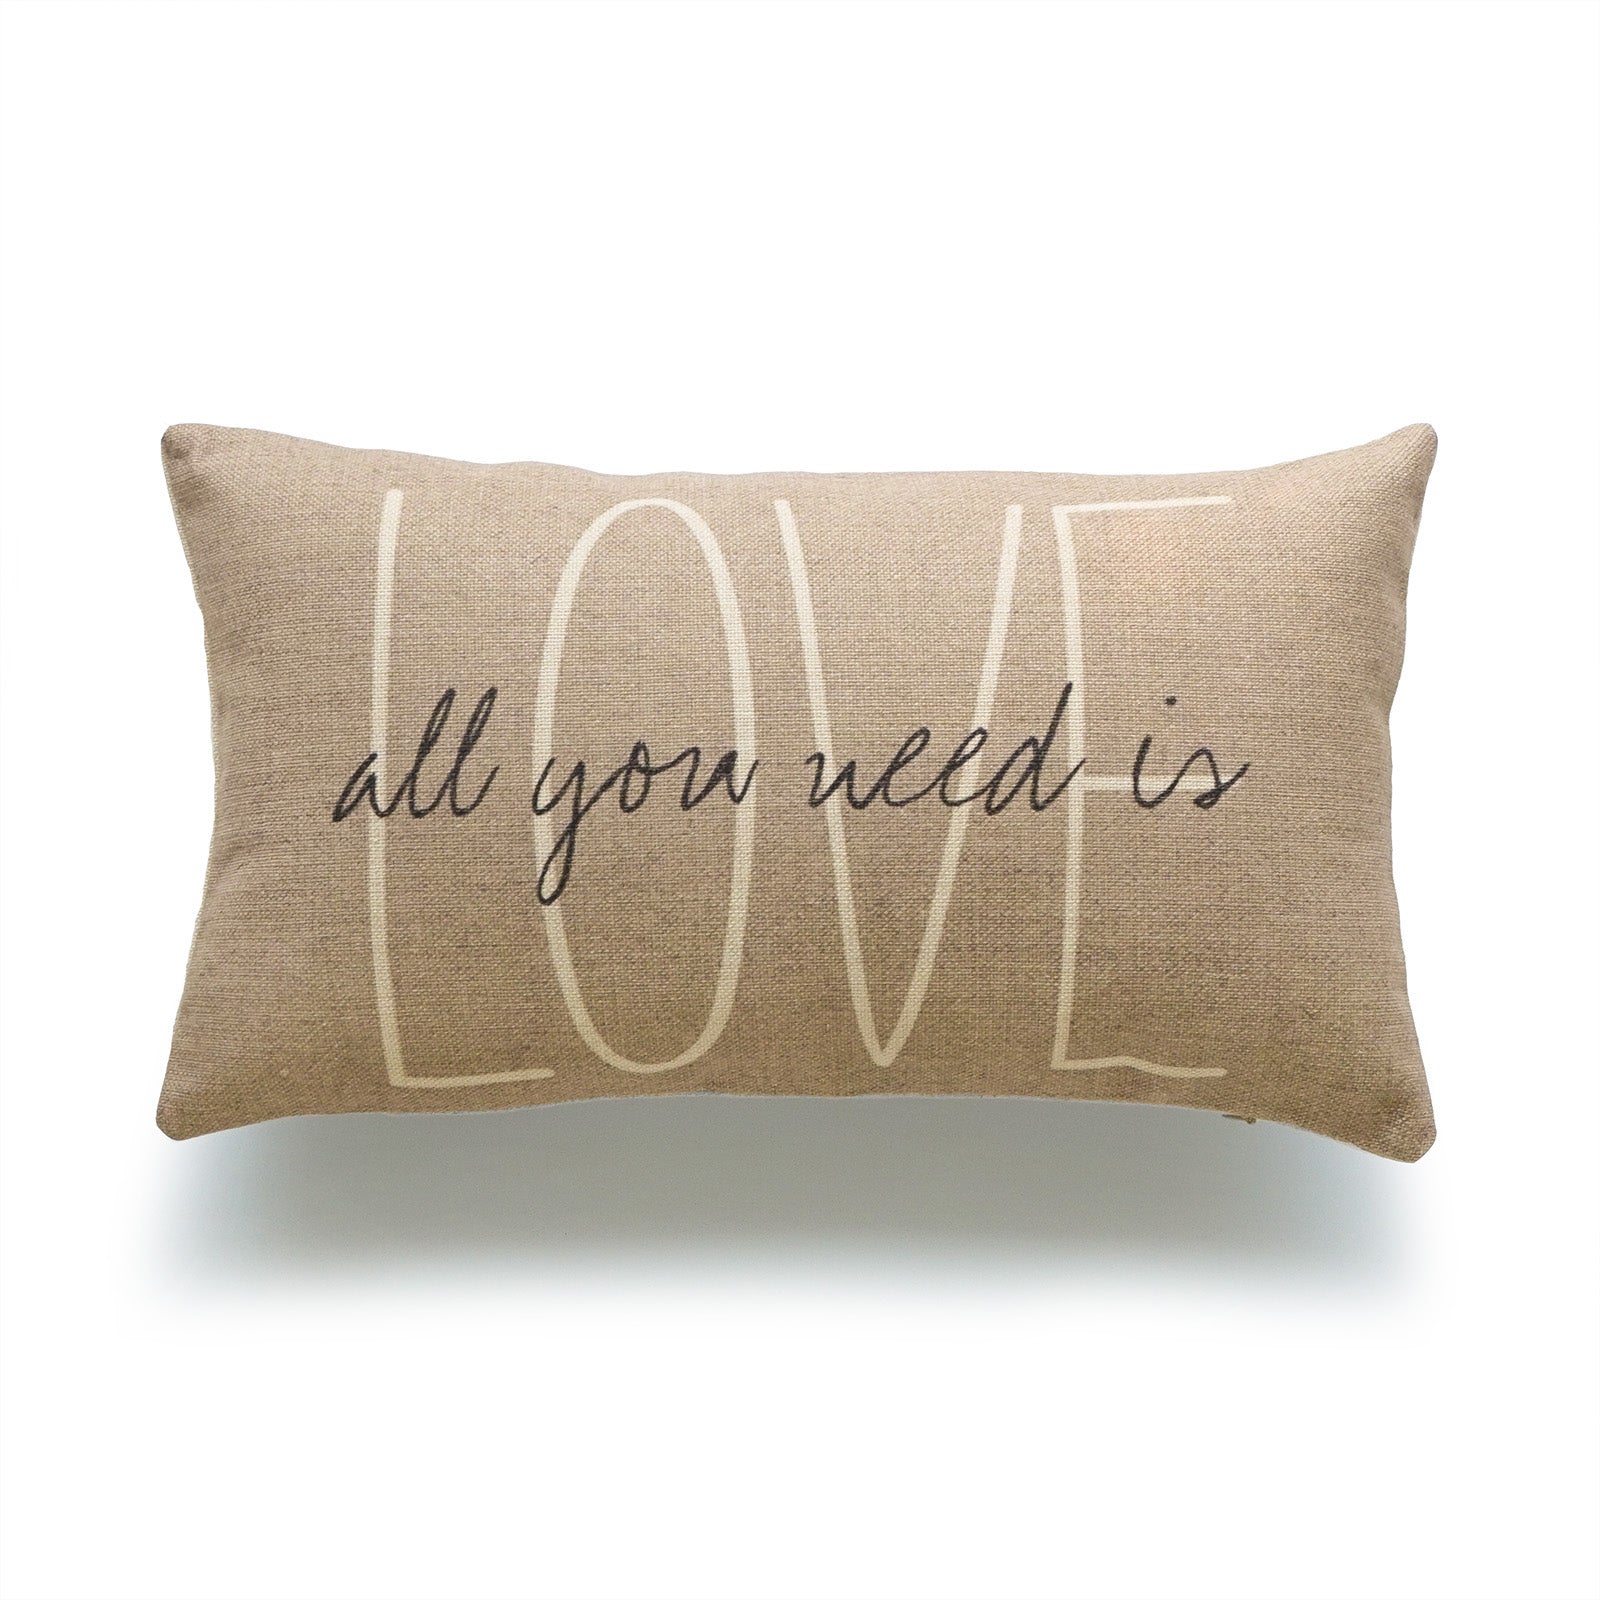 Rustic All You Need Is Love Lumbar Pillow Cover, Tan, 12"x20"